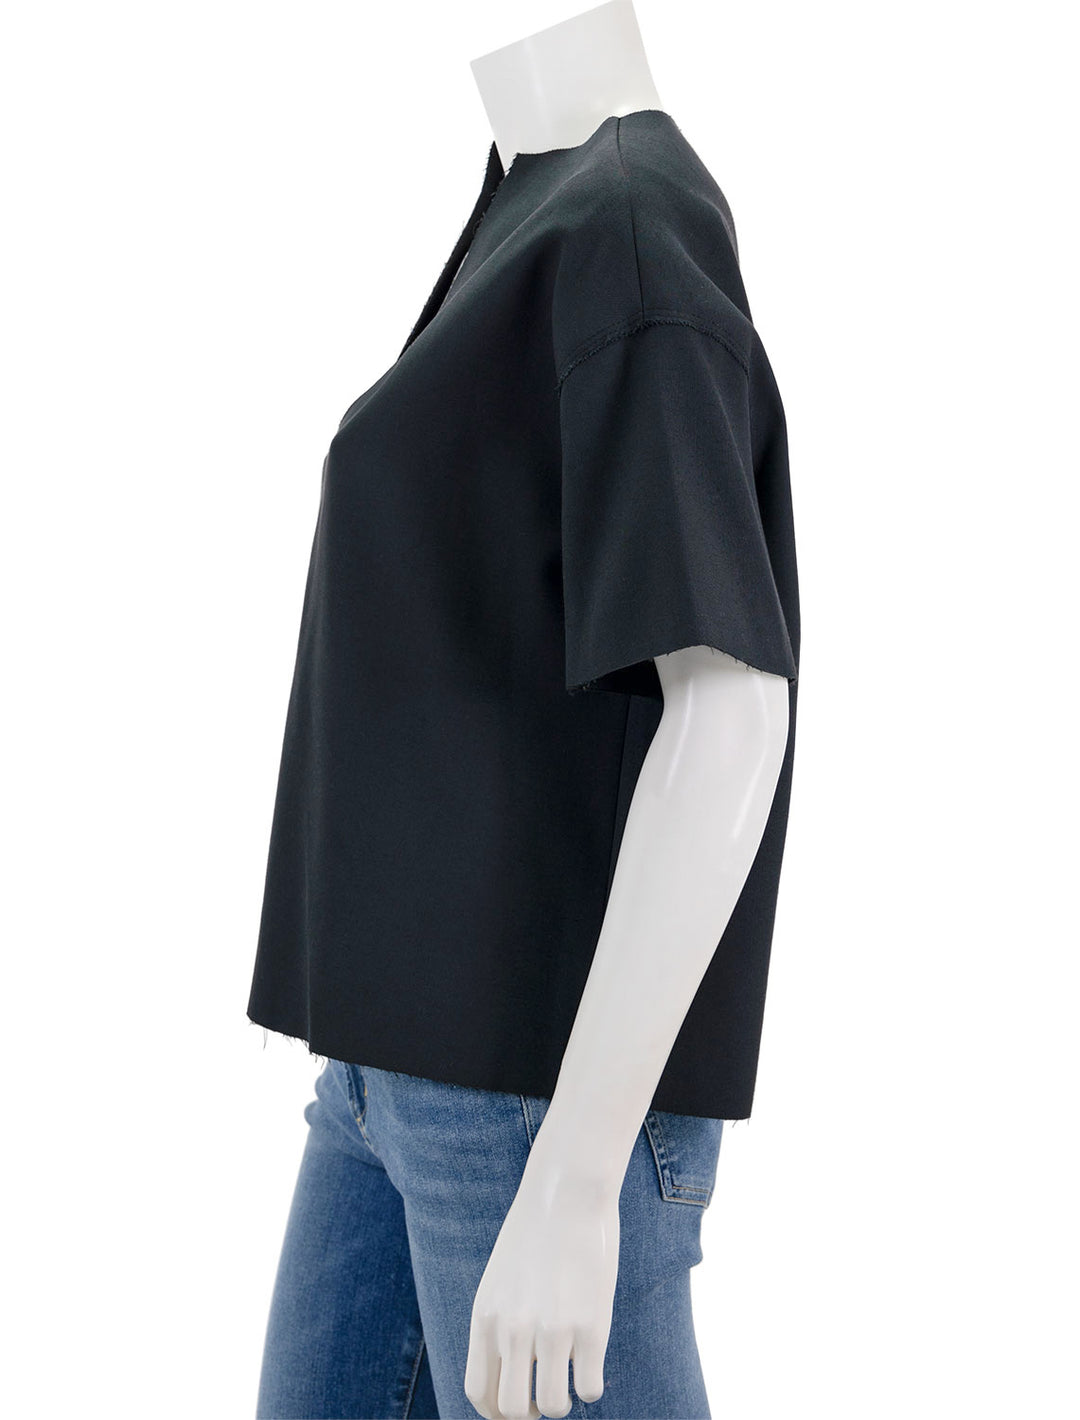 Side view of STAUD's amigoni top in black.